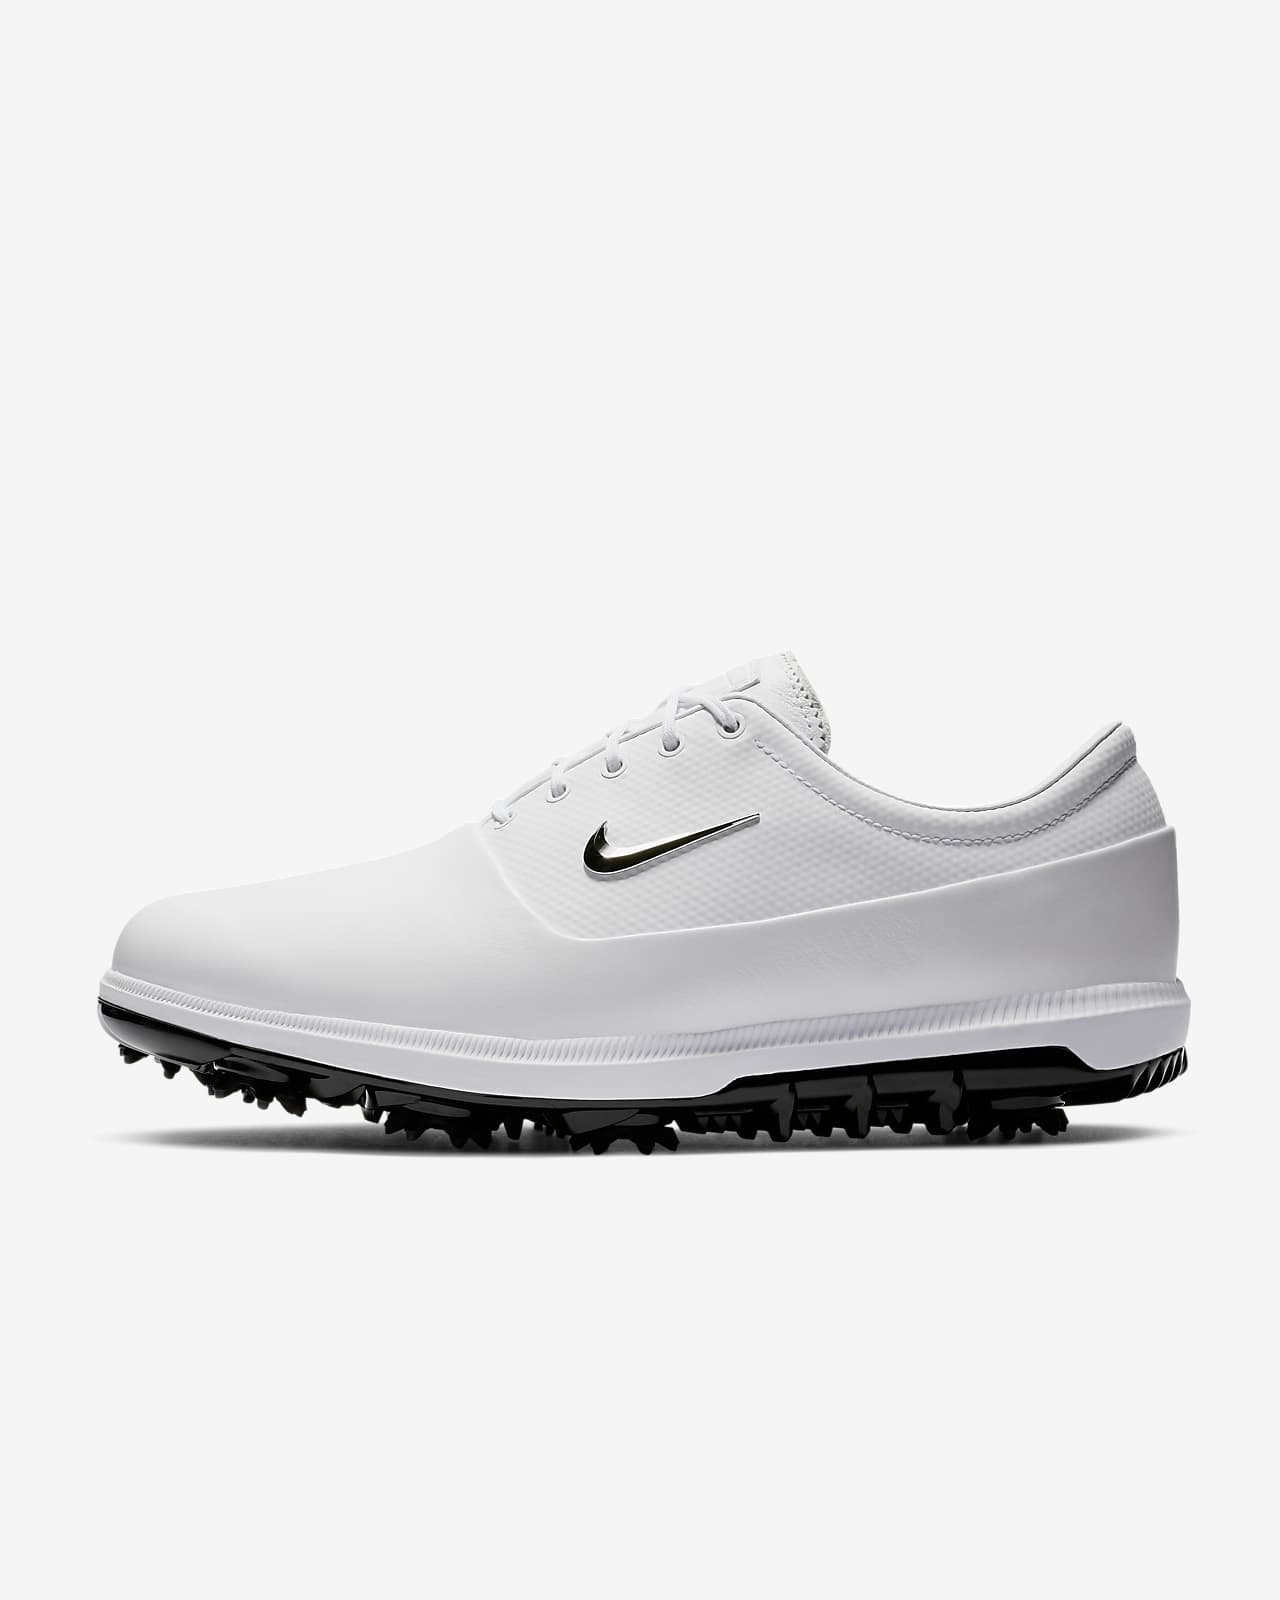 upcoming nike golf shoes